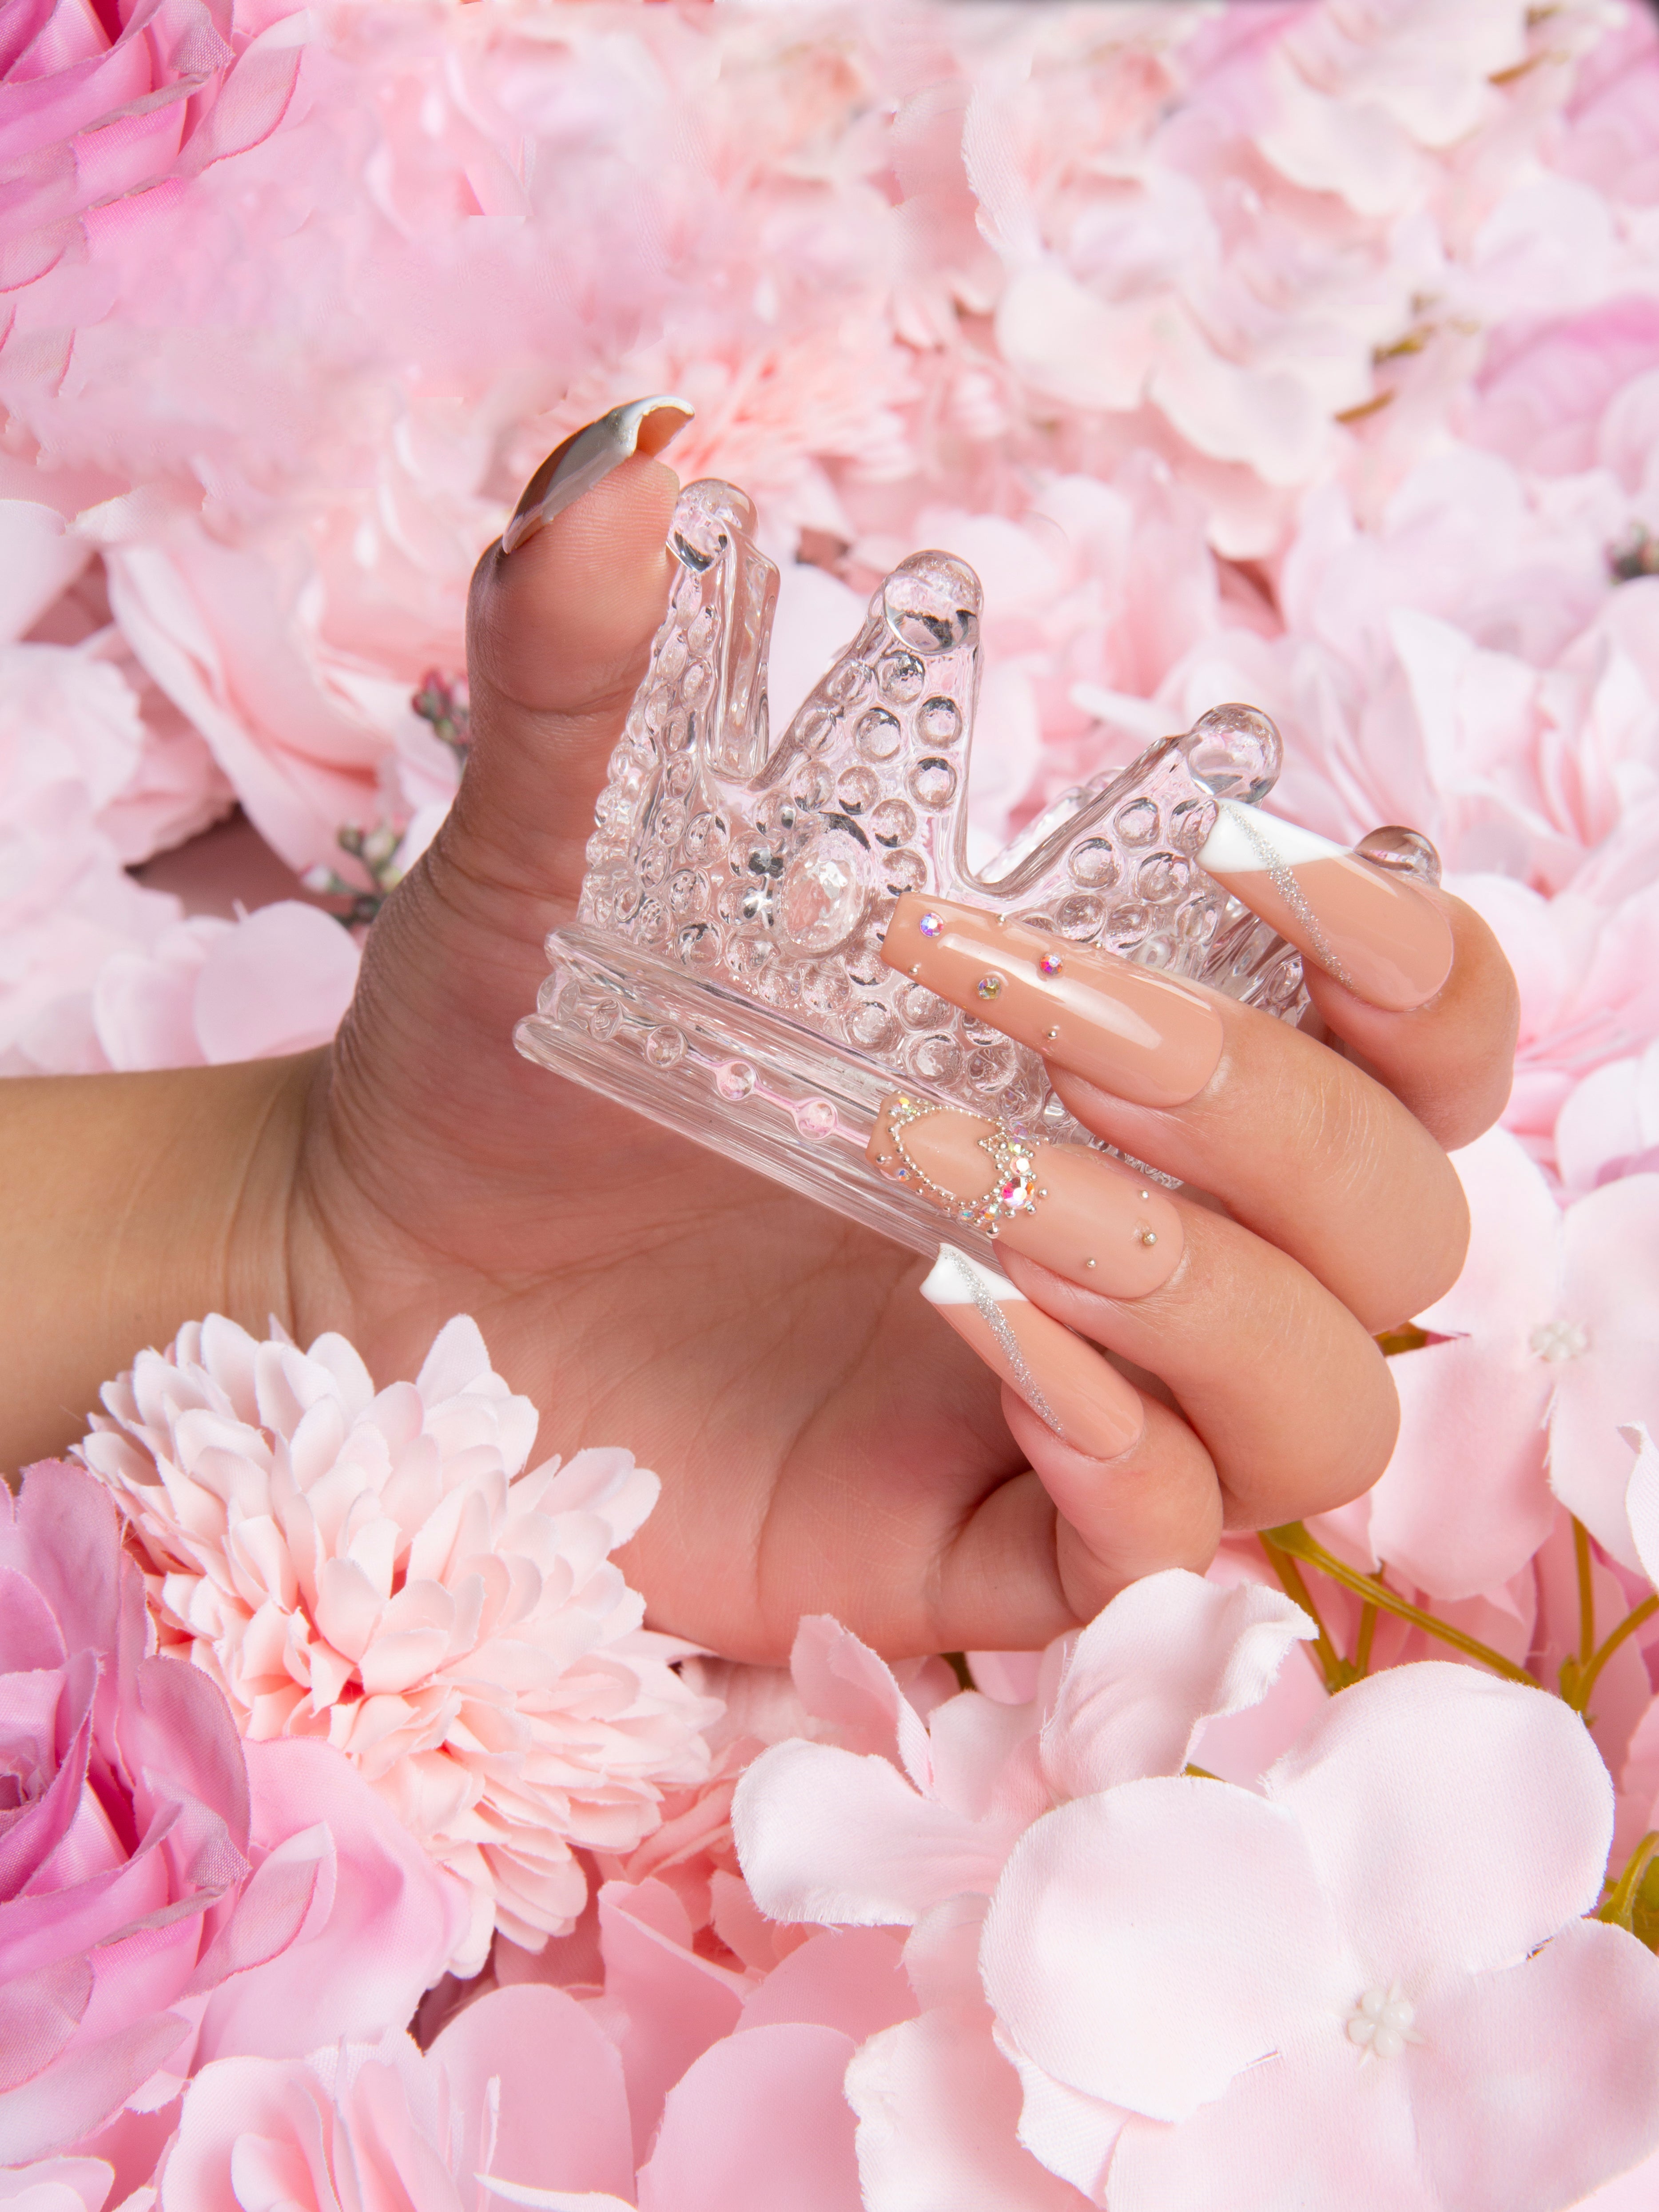 Hand with press-on acrylic nails featuring French tips, glitter, and embellishments, holding a translucent crown among light pink and white flowers.